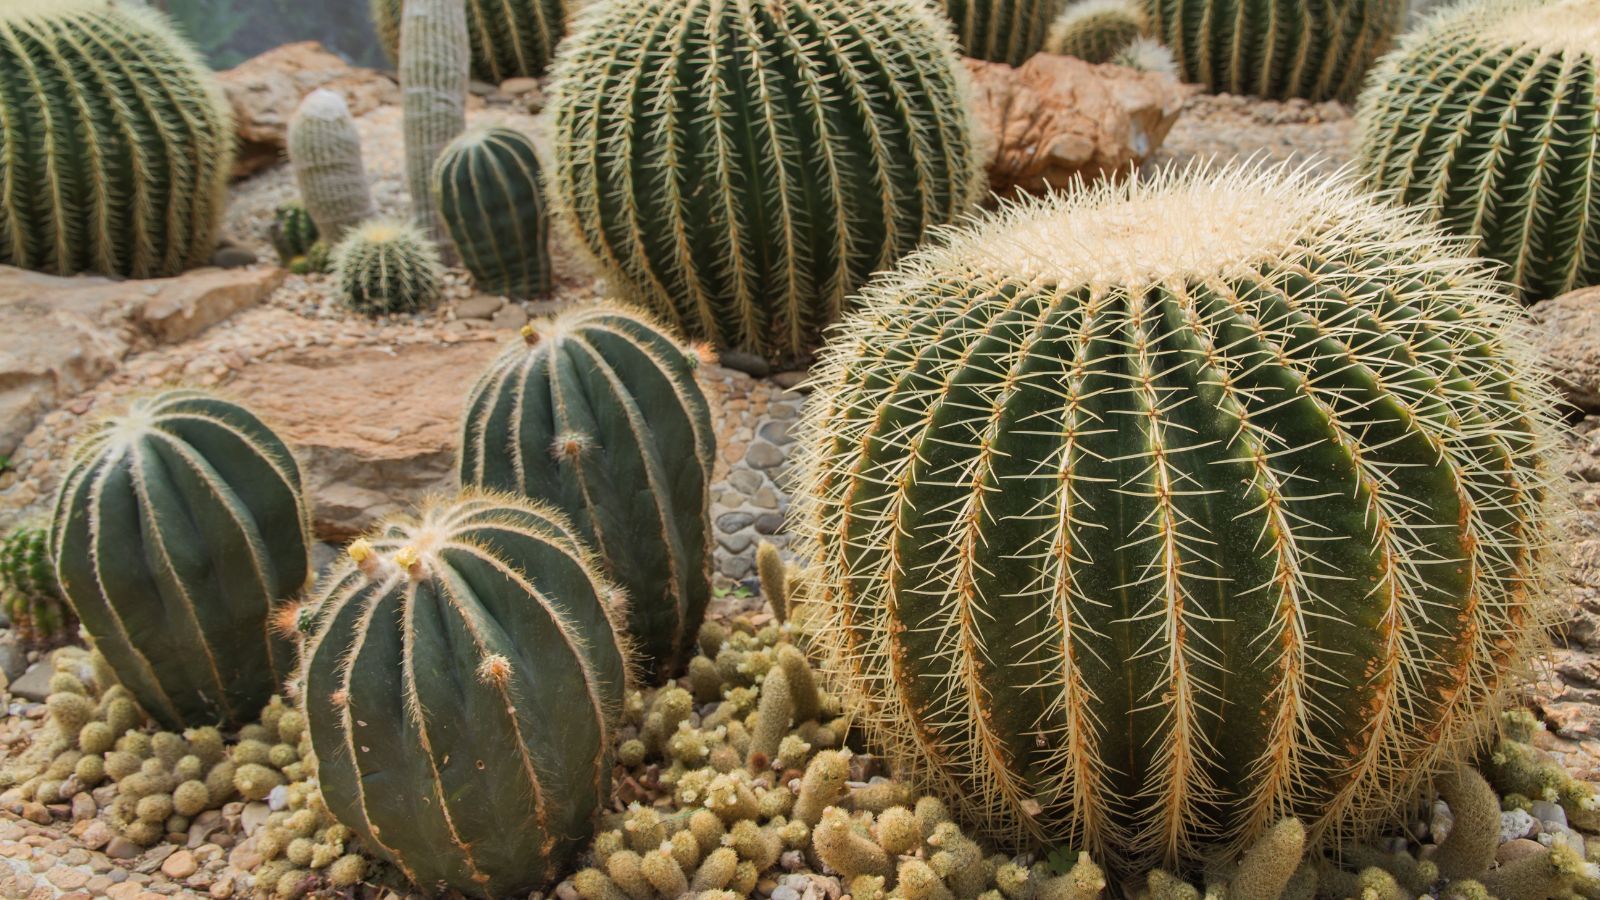 Cacti and succulents are a great way to add color and interest to your front yard